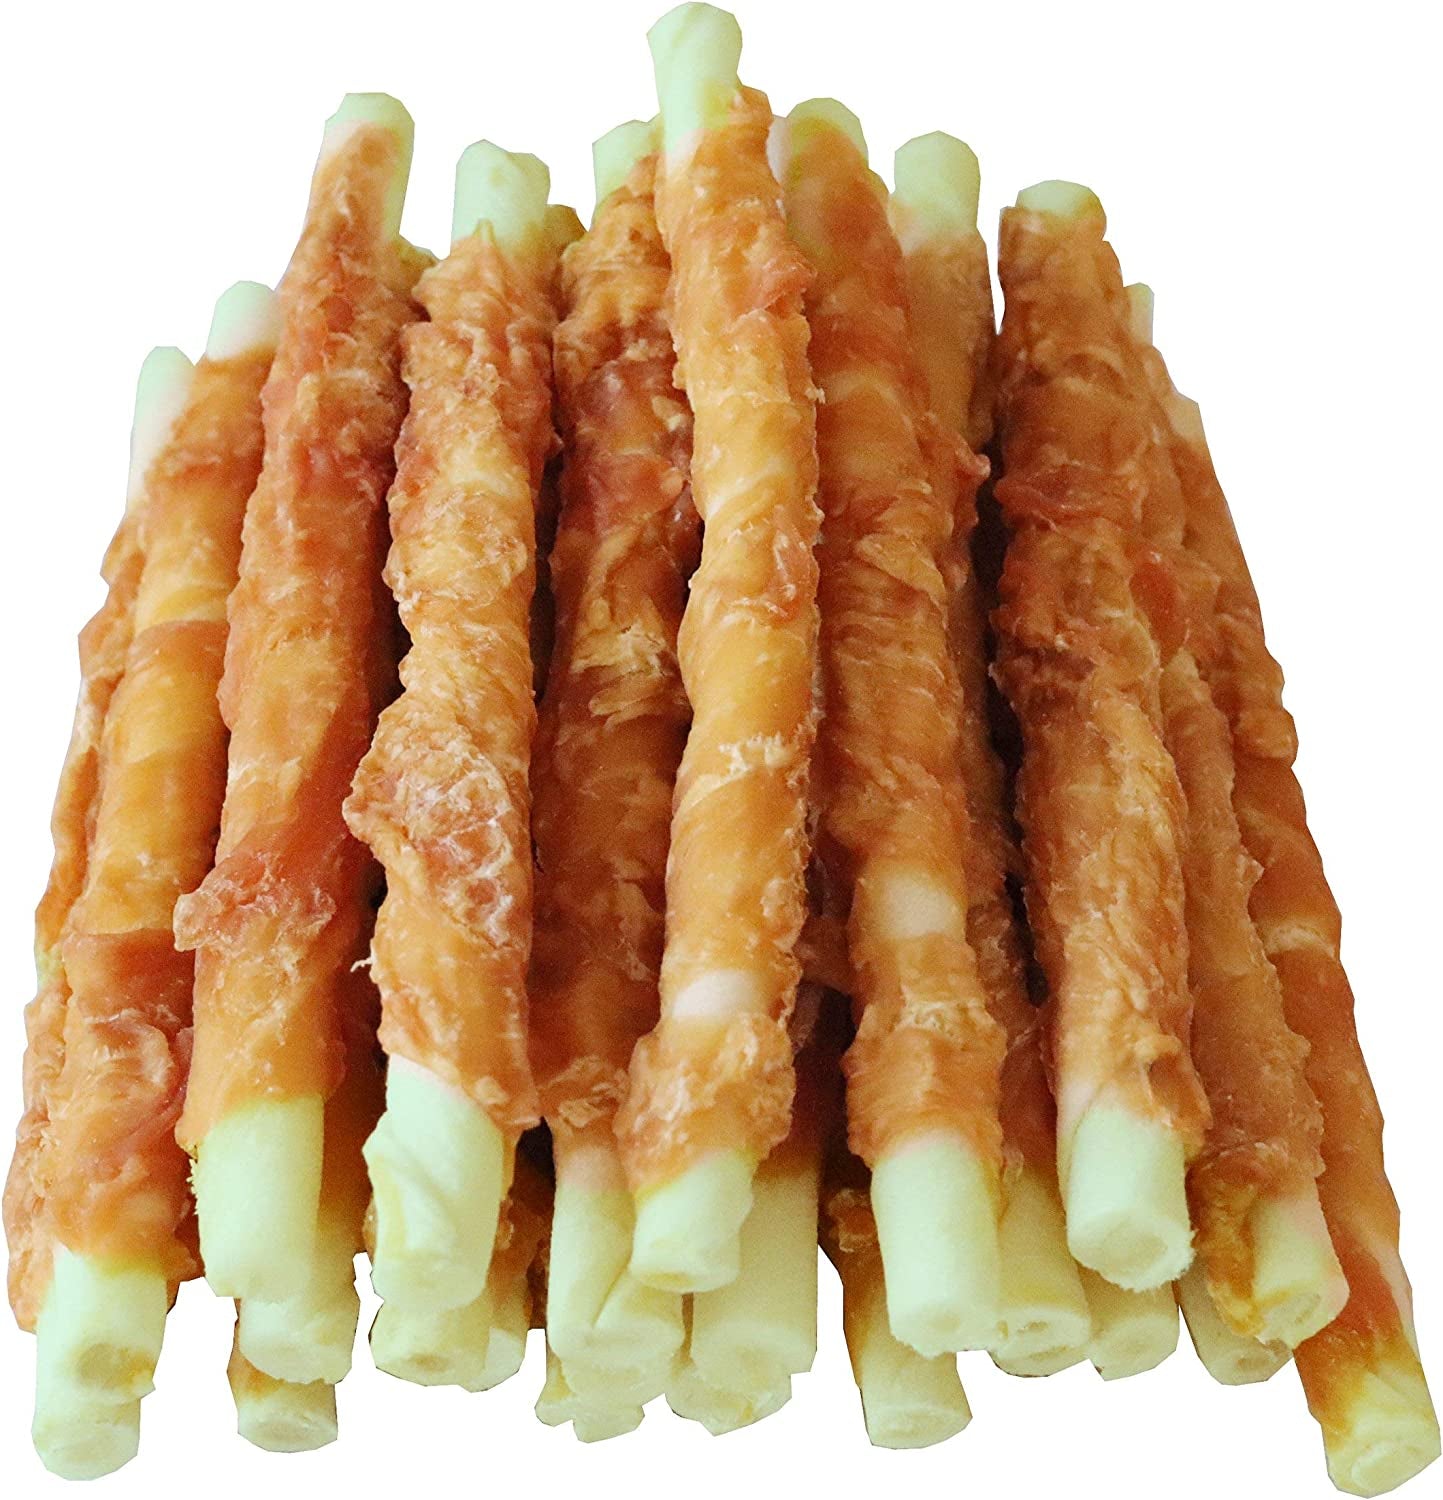 Chicken Wrapped Rawhides for Dogs Treats - Everyday-Sales.com